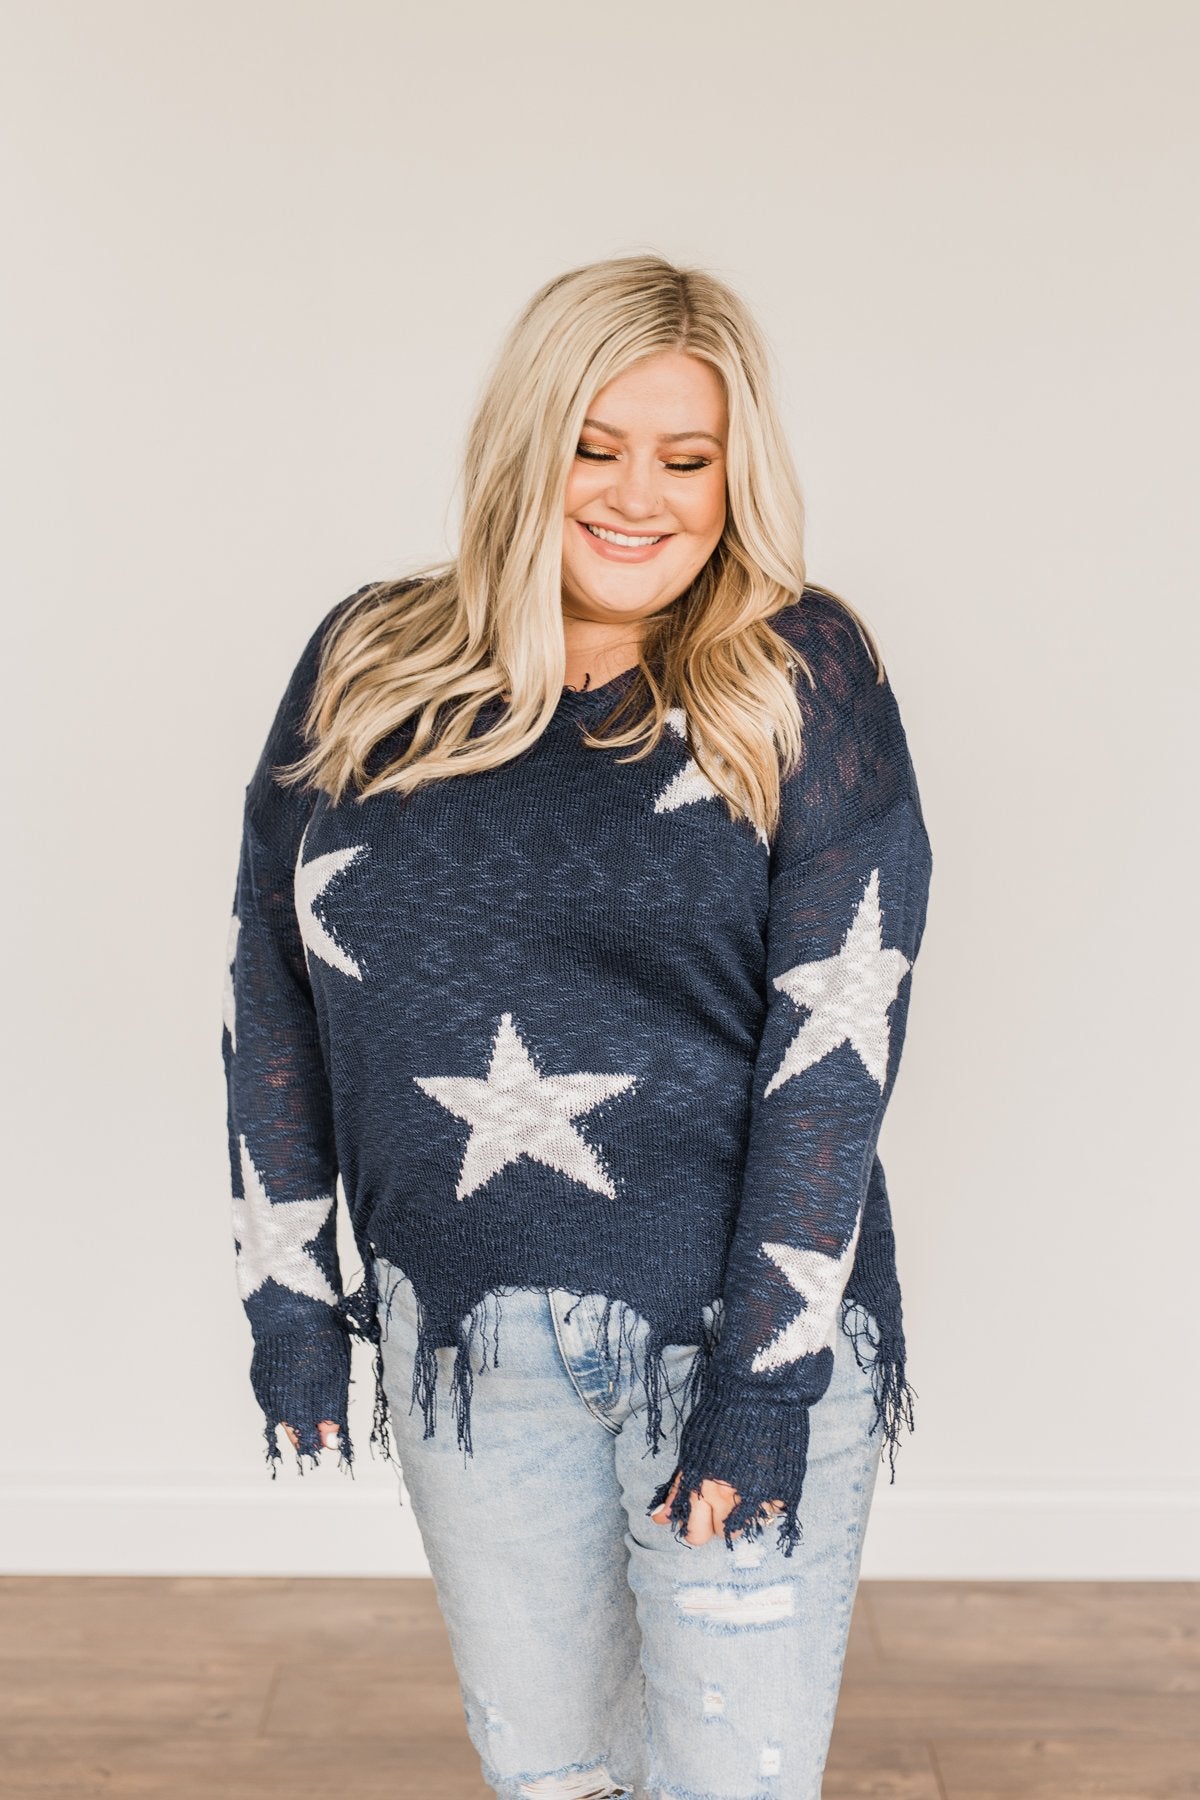 Unforgettable Moments Light Weight Sweater- Navy